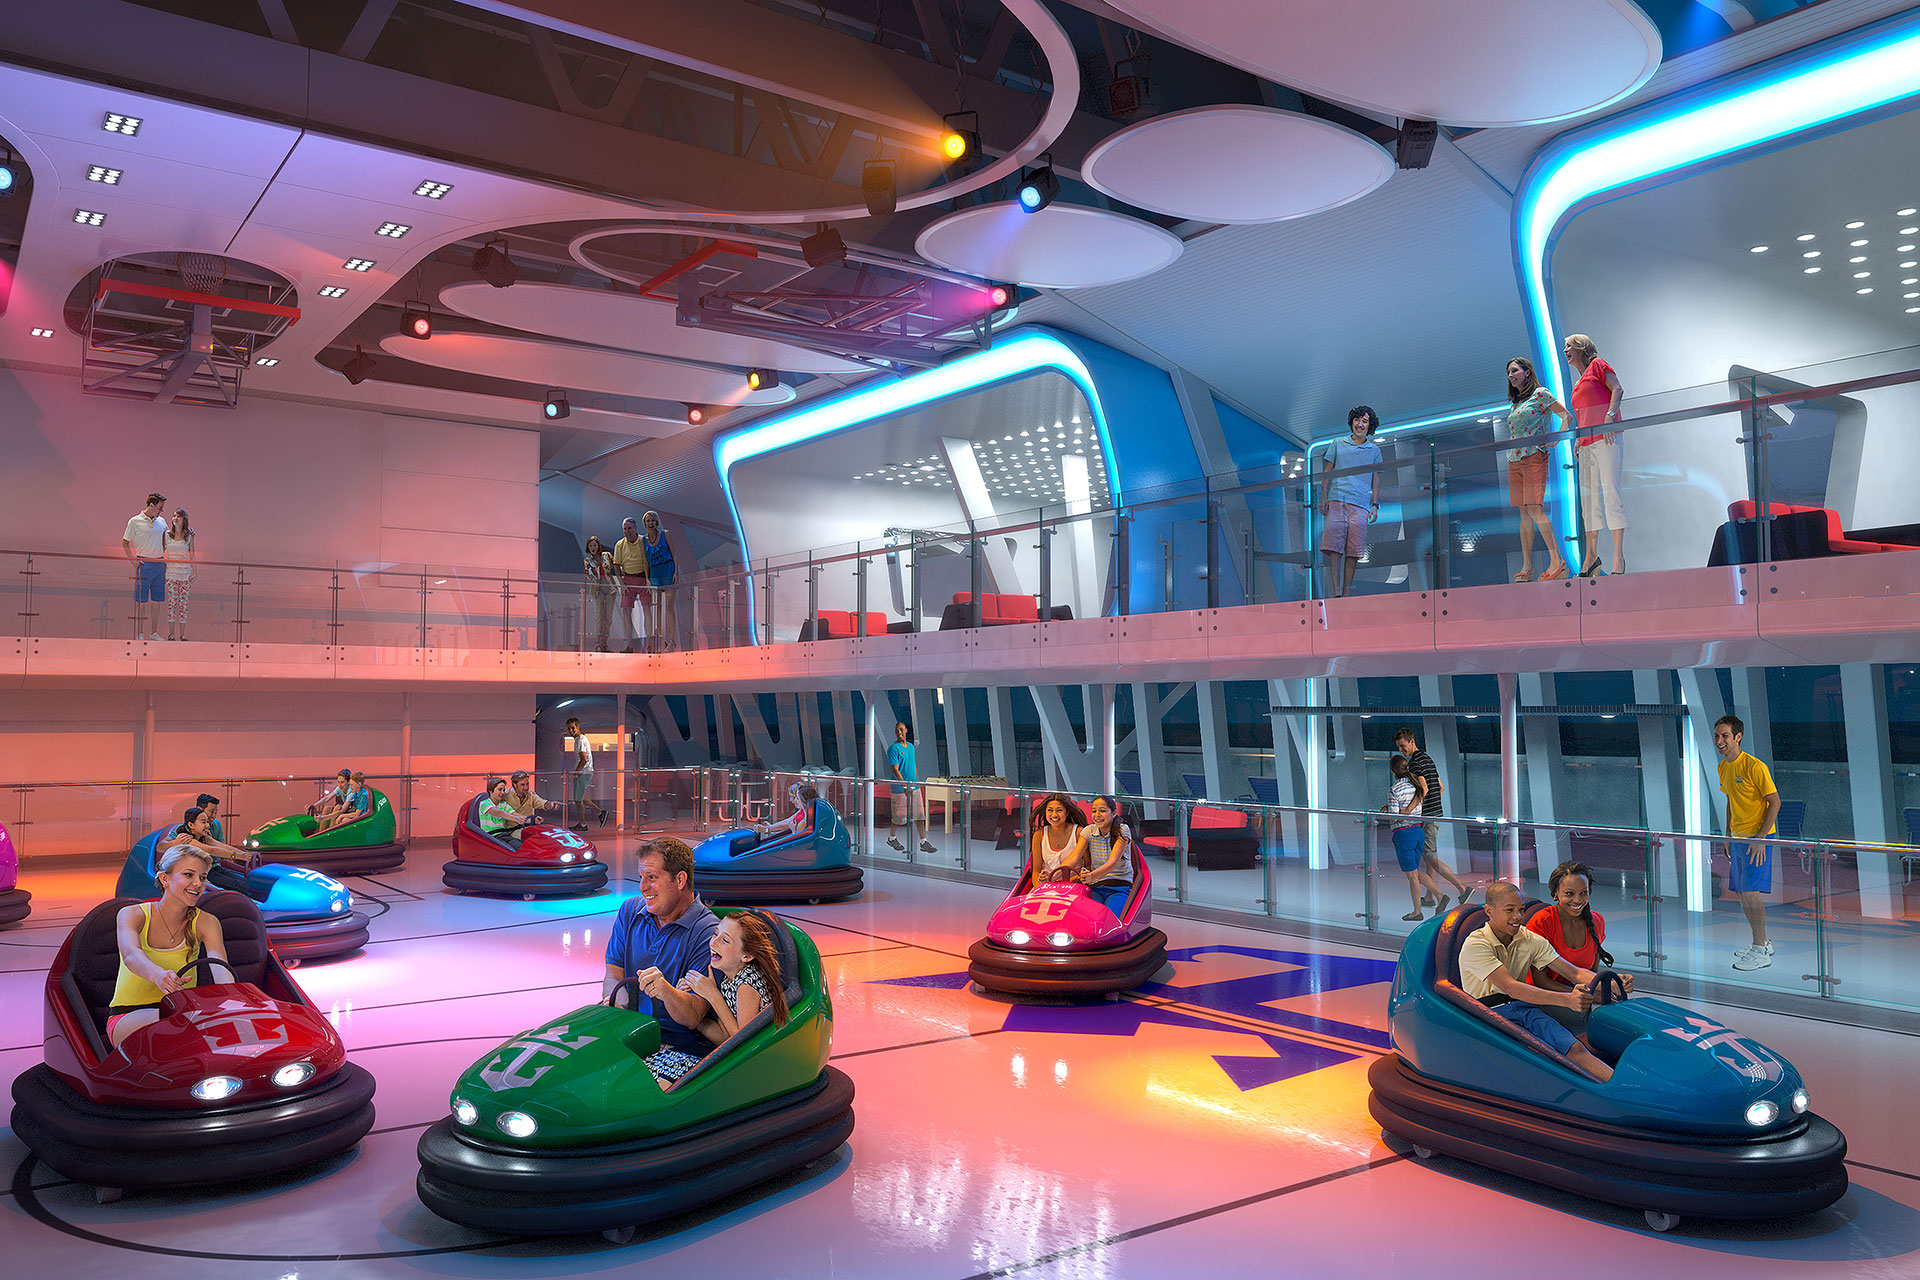 most fun cruise ship for young adults